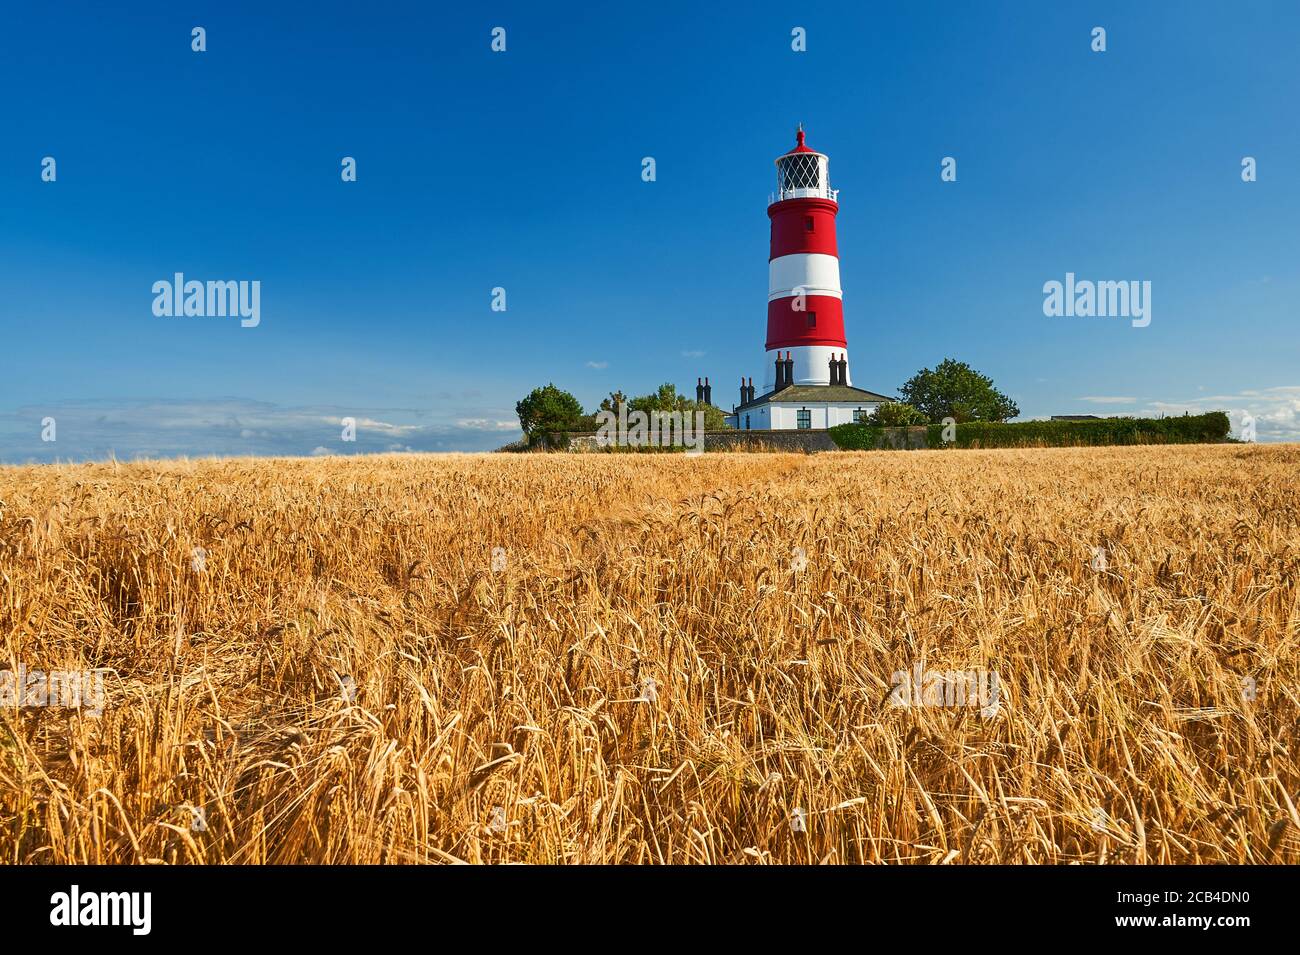 Happisburgh, Norfolk, Red and White striped lighthouse against a blue sky Stock Photo